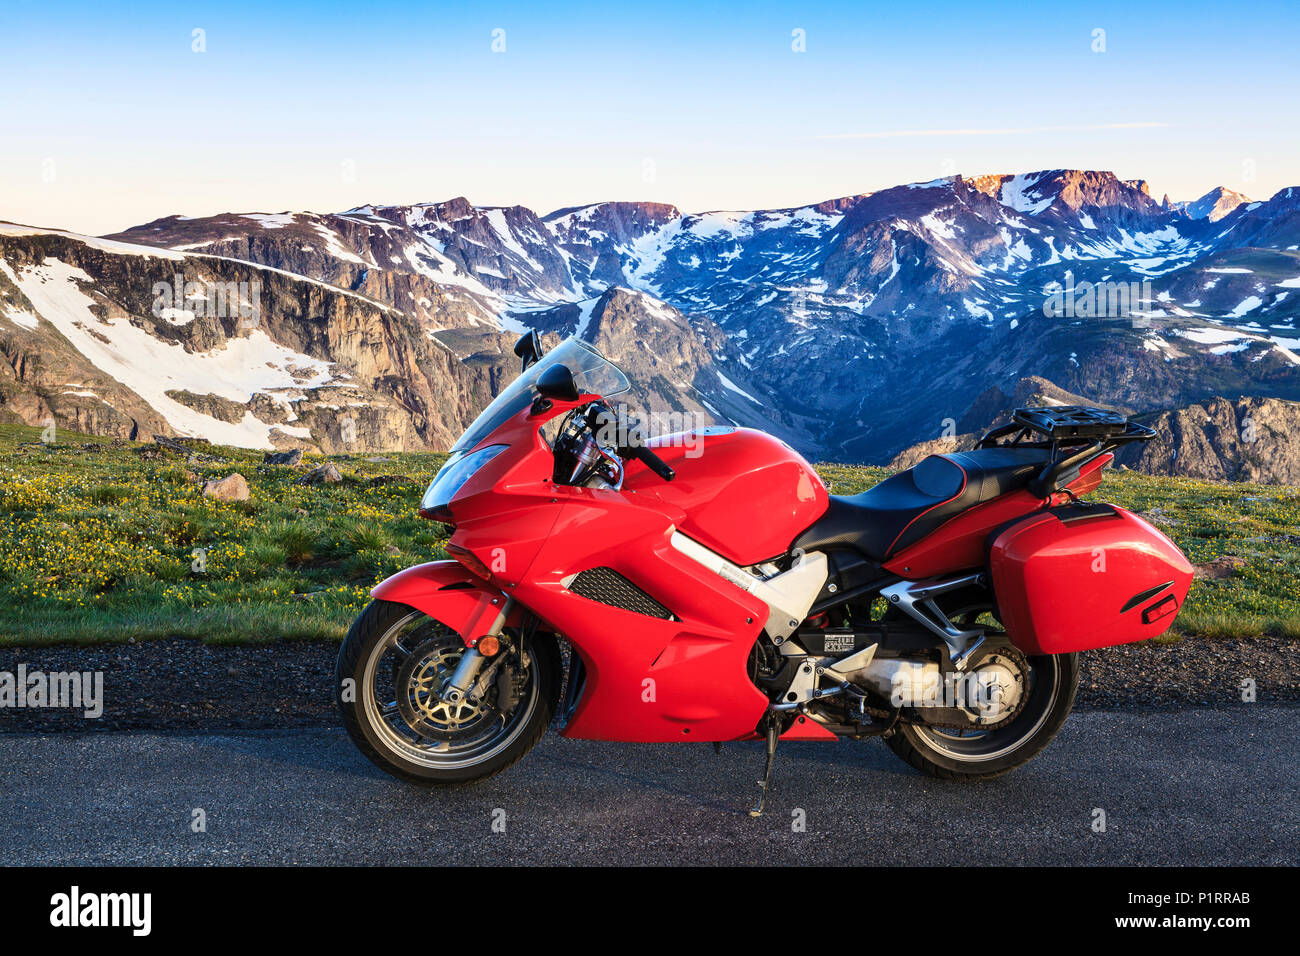 View from the Beartooth Highway of the Beartooth Mountains and a motorcycle parked on the roadside; Cody, Wyoming, United States of America Stock Photo